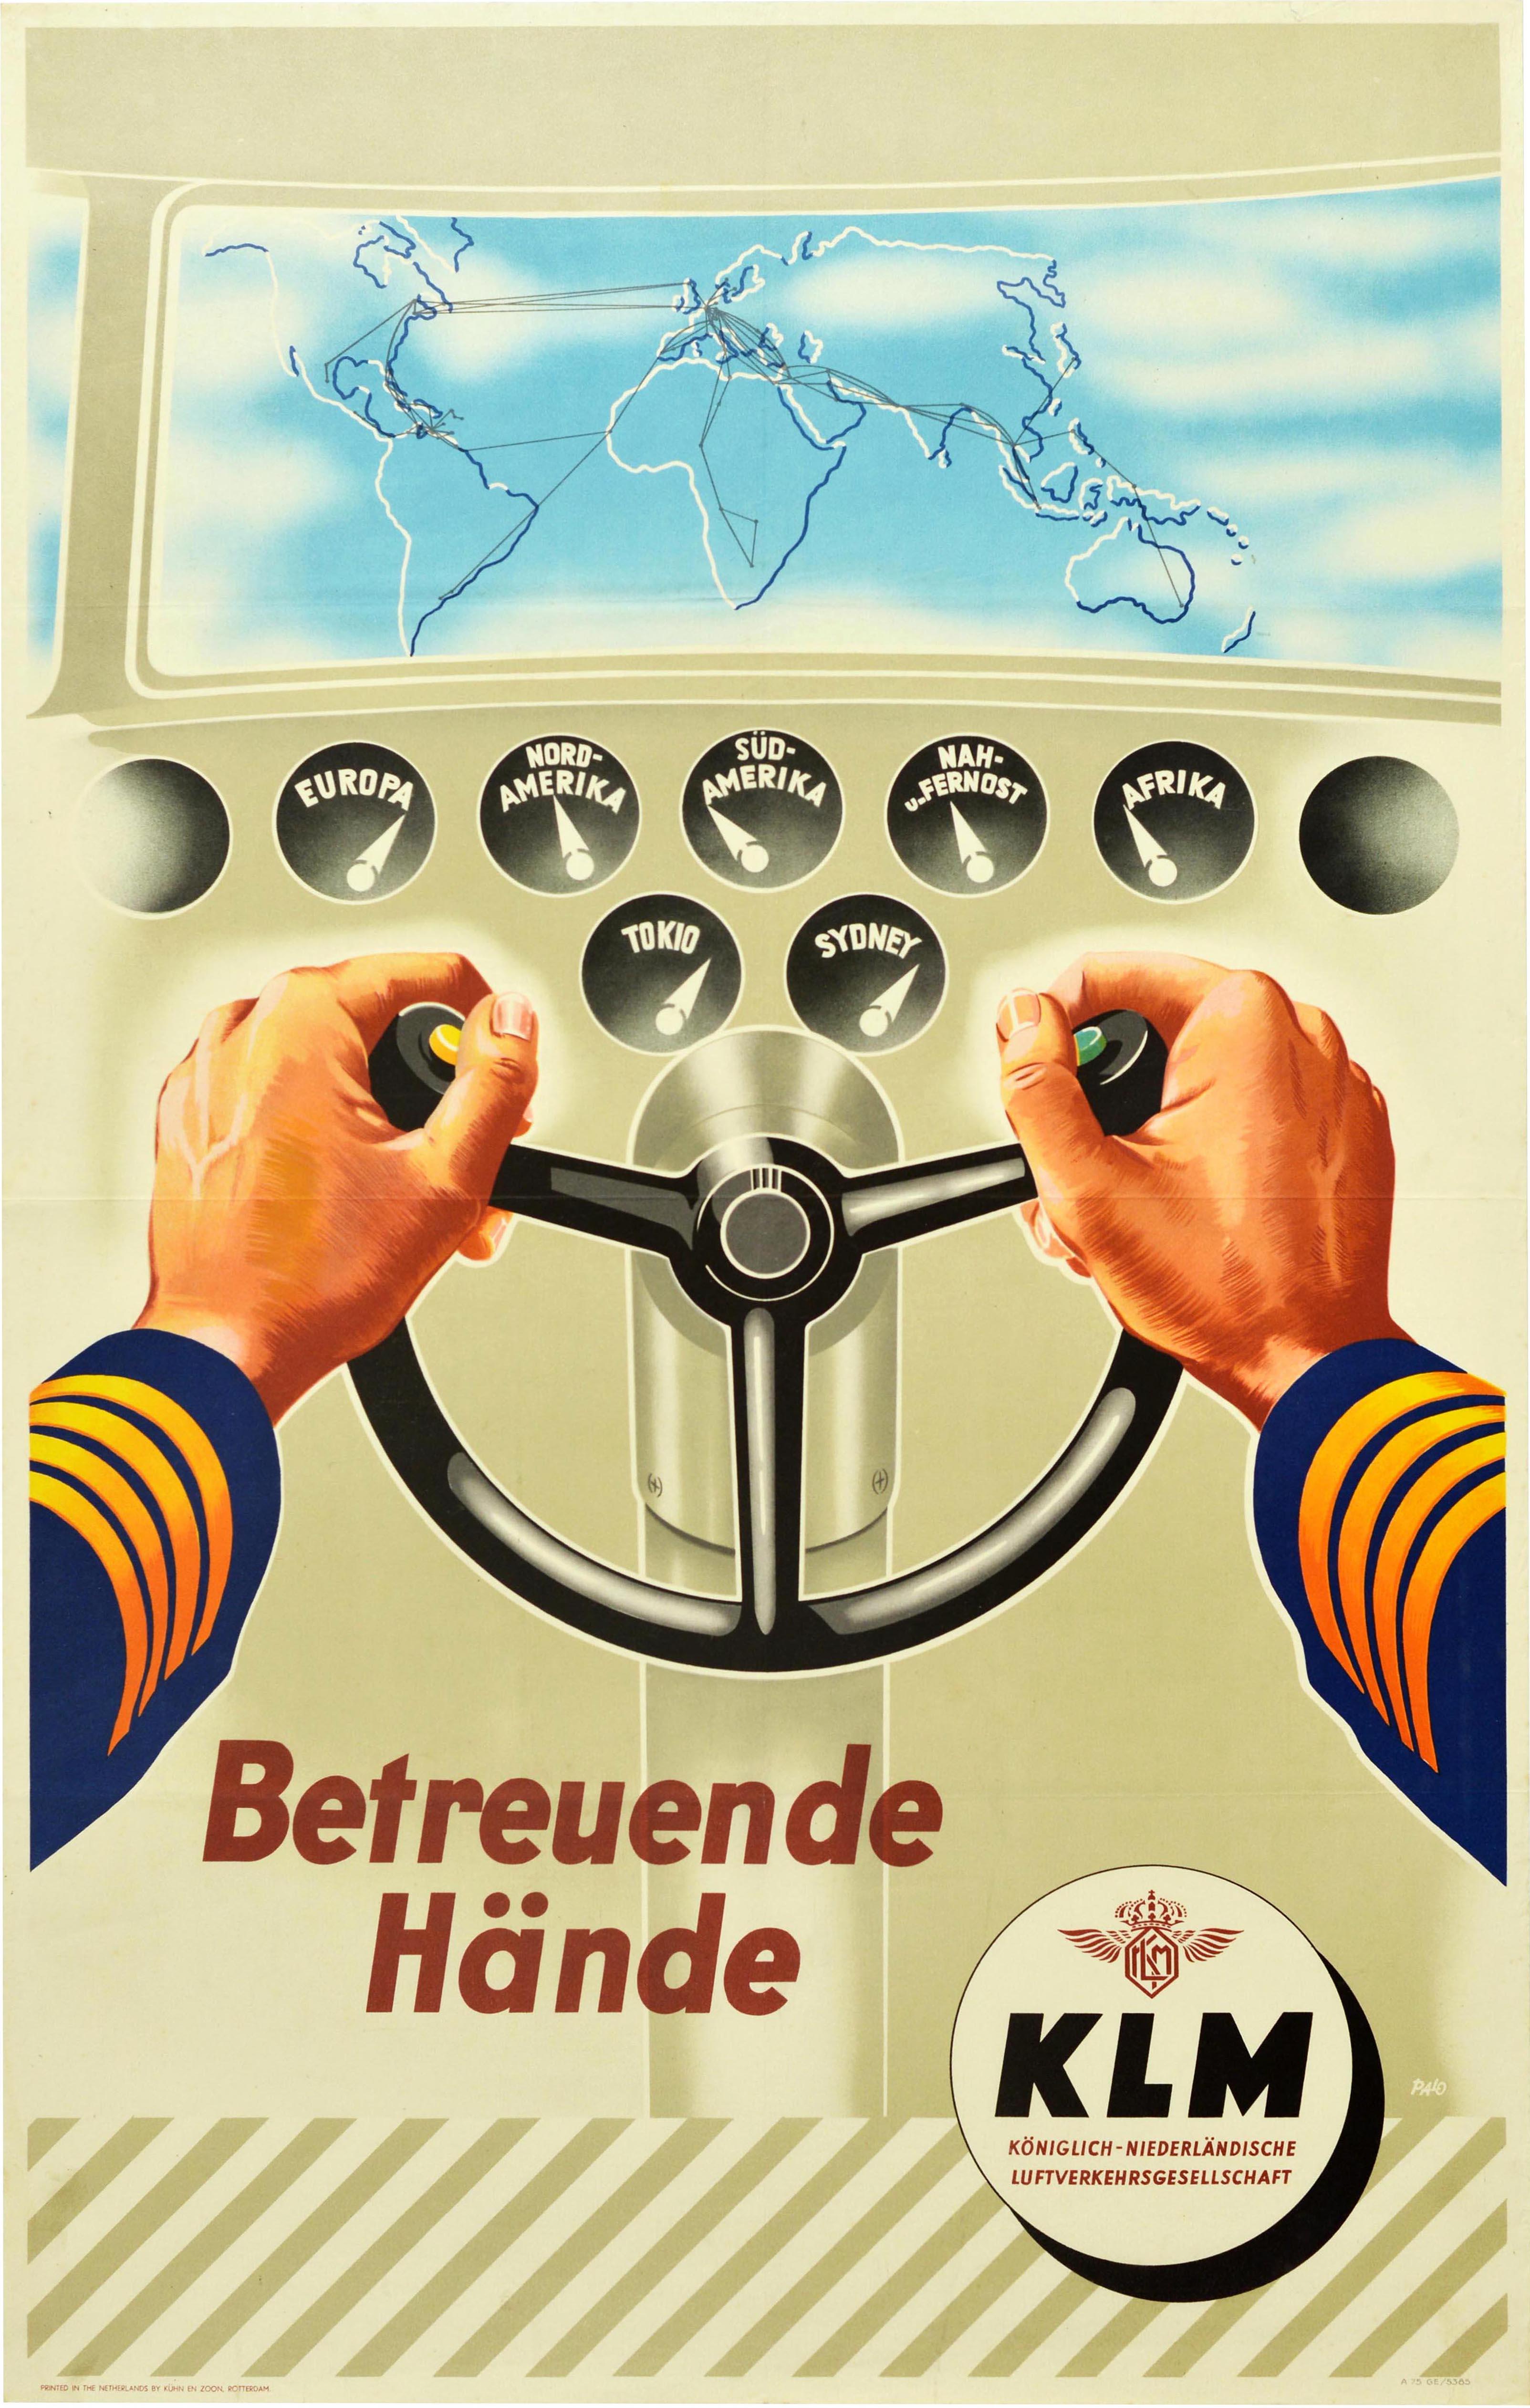 Original vintage KLM airline advertising poster - Caring hands / Betreuende Hande - featuring a great design showing the arms of a pilot in a blue and gold uniform holding the controls in the cabin of a plane with a world map featuring flight routes